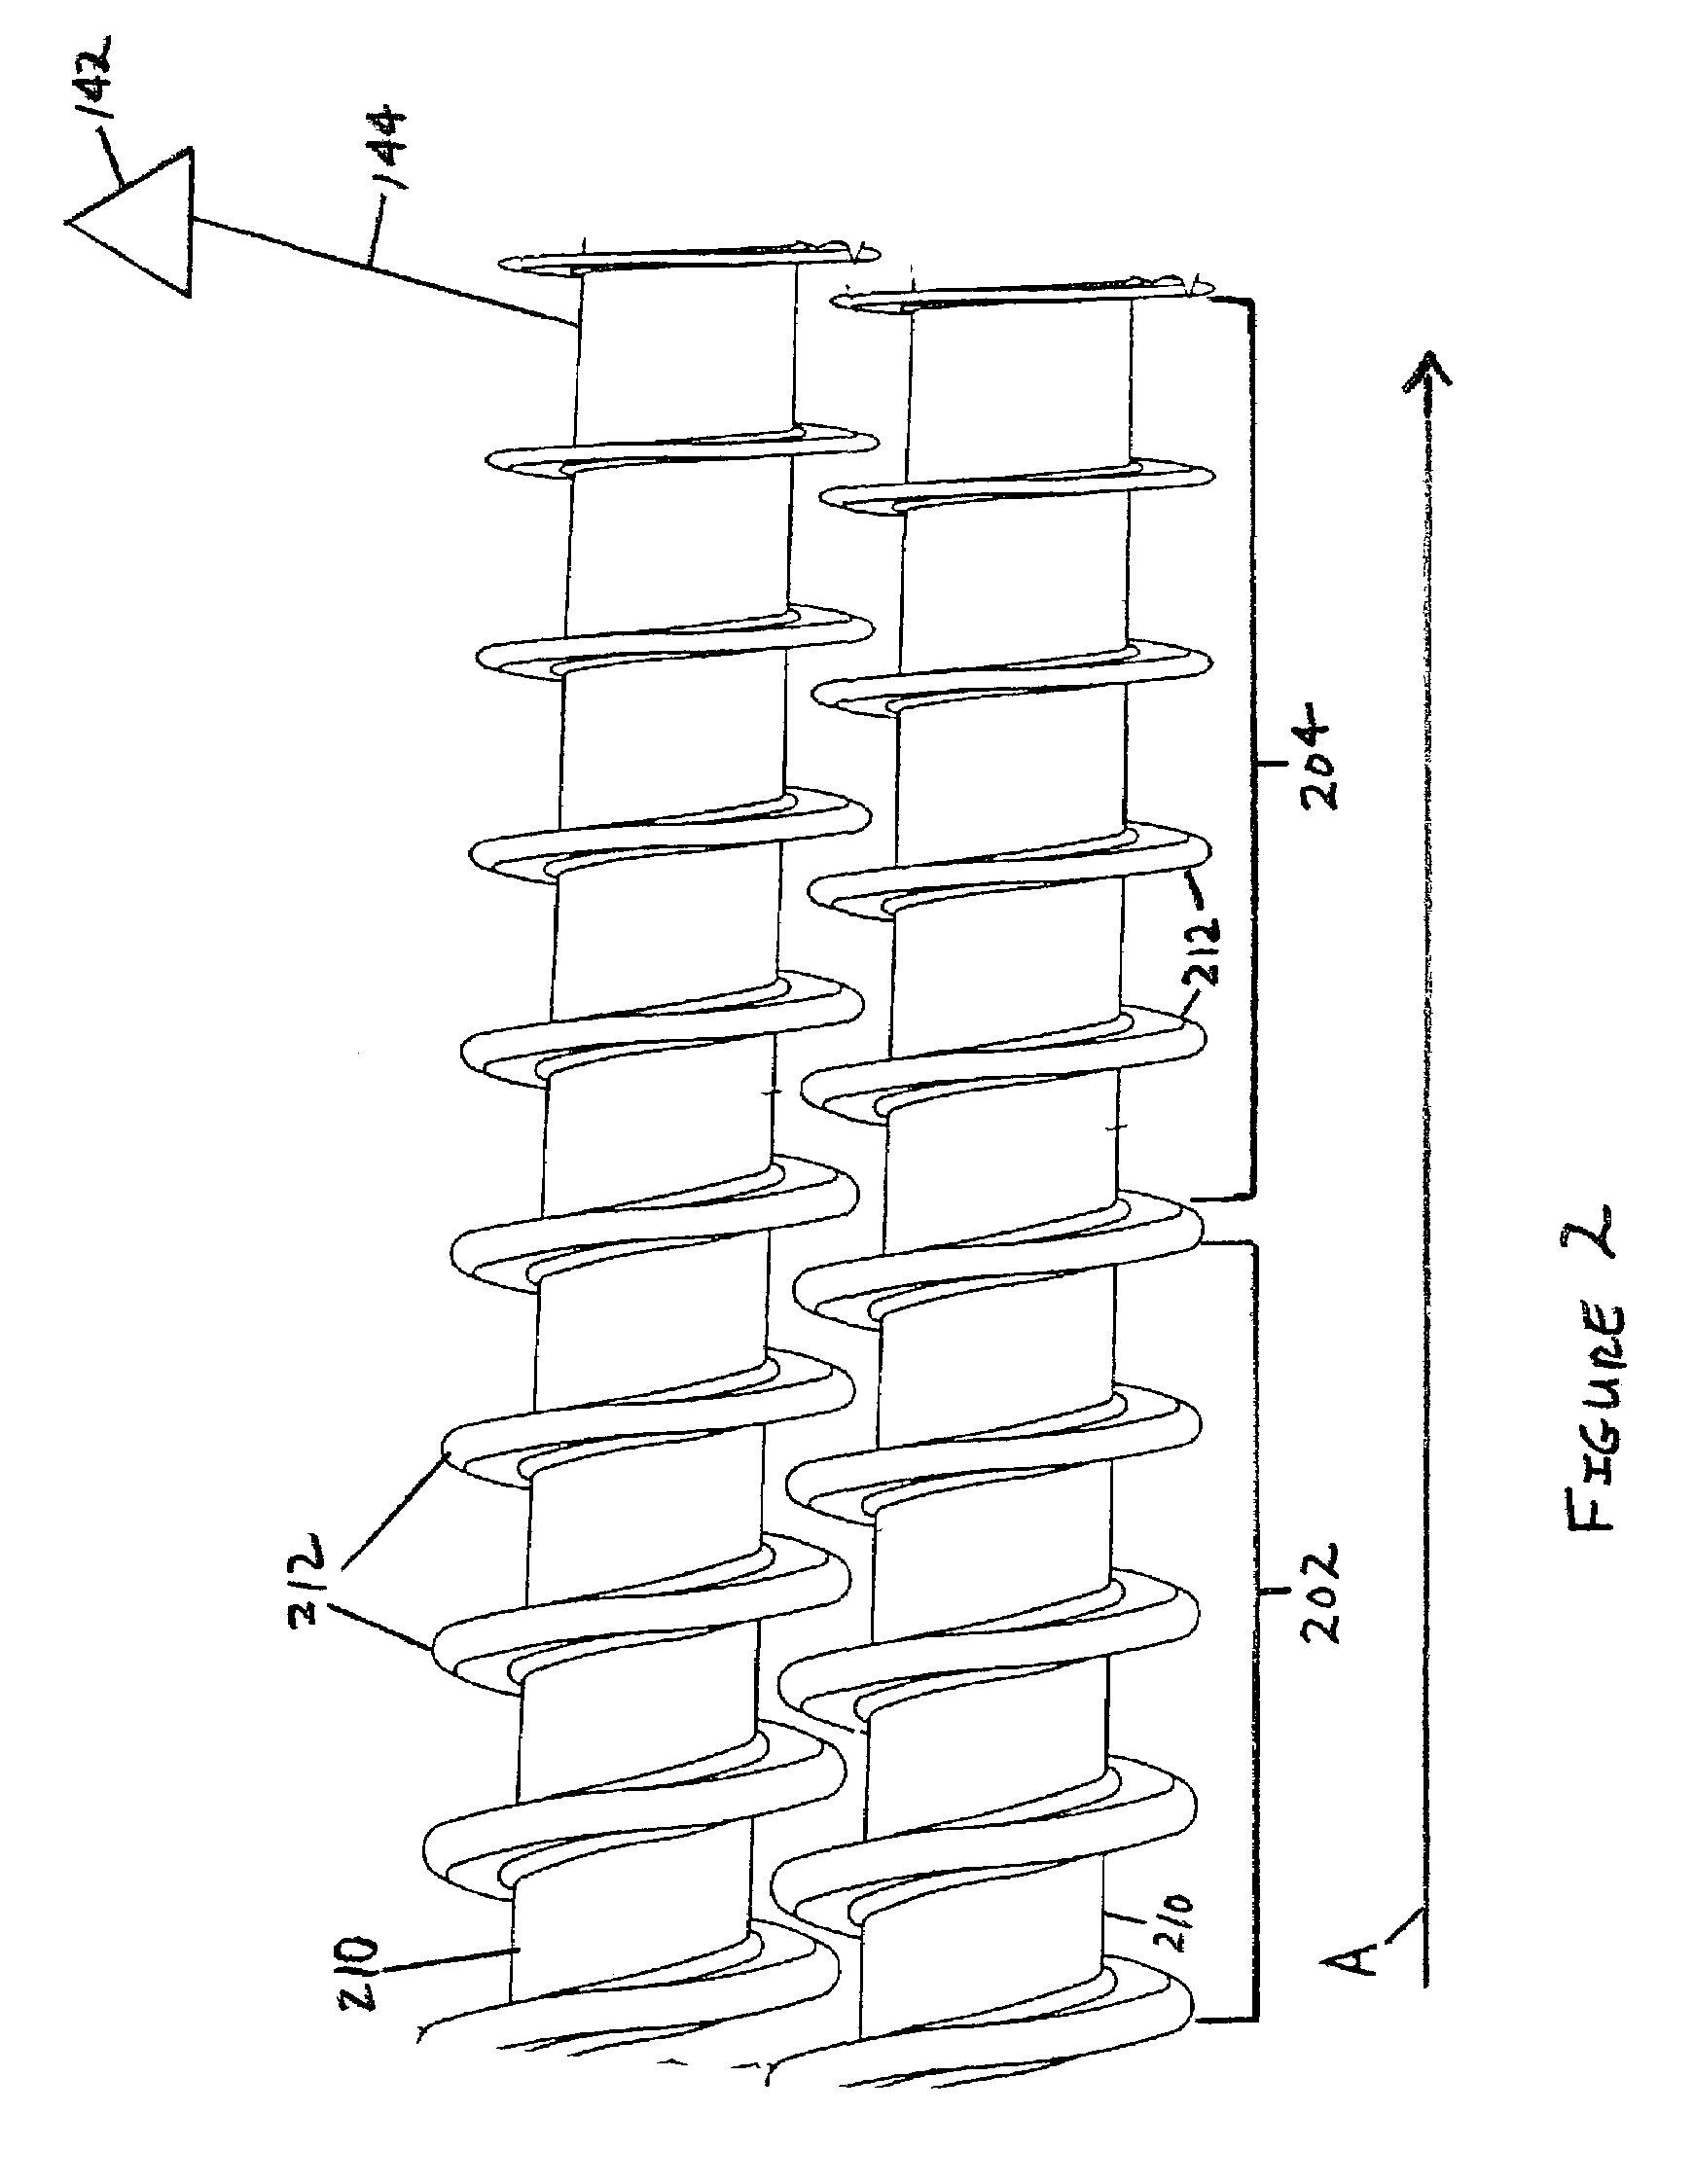 Co-extrusion of energetic materials using multiple twin screw extruders